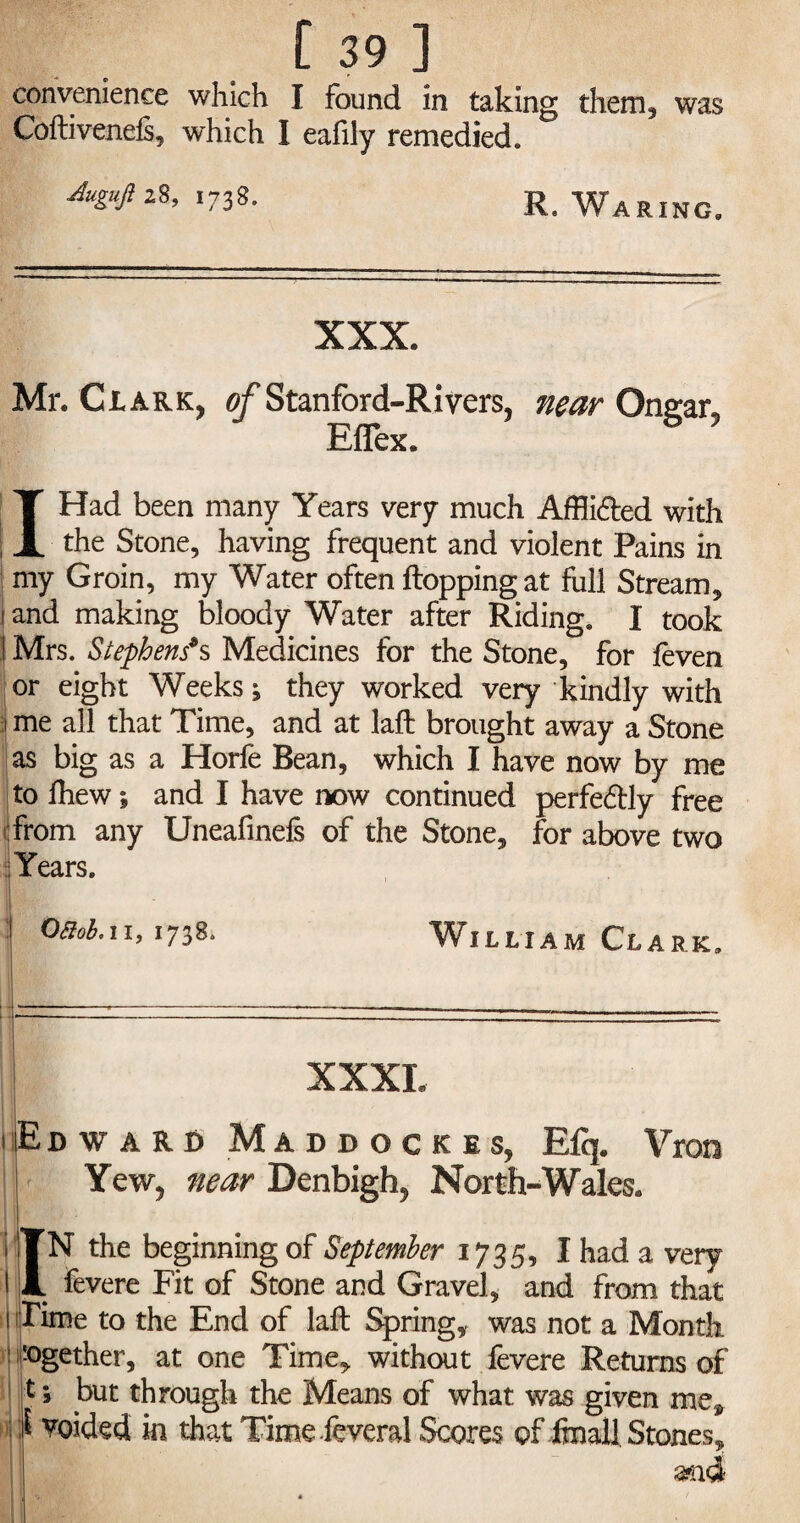 convenience which I found in taking them, was Coltivenefs, which I eafily remedied. ^28,1738. R. Waring. XXX. Mr. Clark, of Stanford-Rivers, near Onear, Eflex. I Had been many Years very much Affli&ed with the Stone, having frequent and violent Pains in my Groin, my Water often flopping at full Stream, 1 and making bloody Water after Riding, I took t Mrs. Stephens9s Medicines for the Stone, for feven or eight Weeks; they worked very kindly with i me all that Time, and at laft brought away a Stone as big as a Horfe Bean, which I have now by me to fhew; and I have now continued perfectly free from any Uneafinefs of the Stone, for above two Years. |> ,1'! l ' \ William Clark. A XXXL Edward Maddockes, Bfq. Vron Yew, near Denbigh, North-Wales. IN the beginning of September 1735, I had a very # fevere Fit of Stone and Gravel, and from that Time to the End of laft Spring, was not a Month -ogether, at one Time, without fevere Returns of t; but through the Means of what was given me* } voided in that Time feveral Scores of fmall Stones.